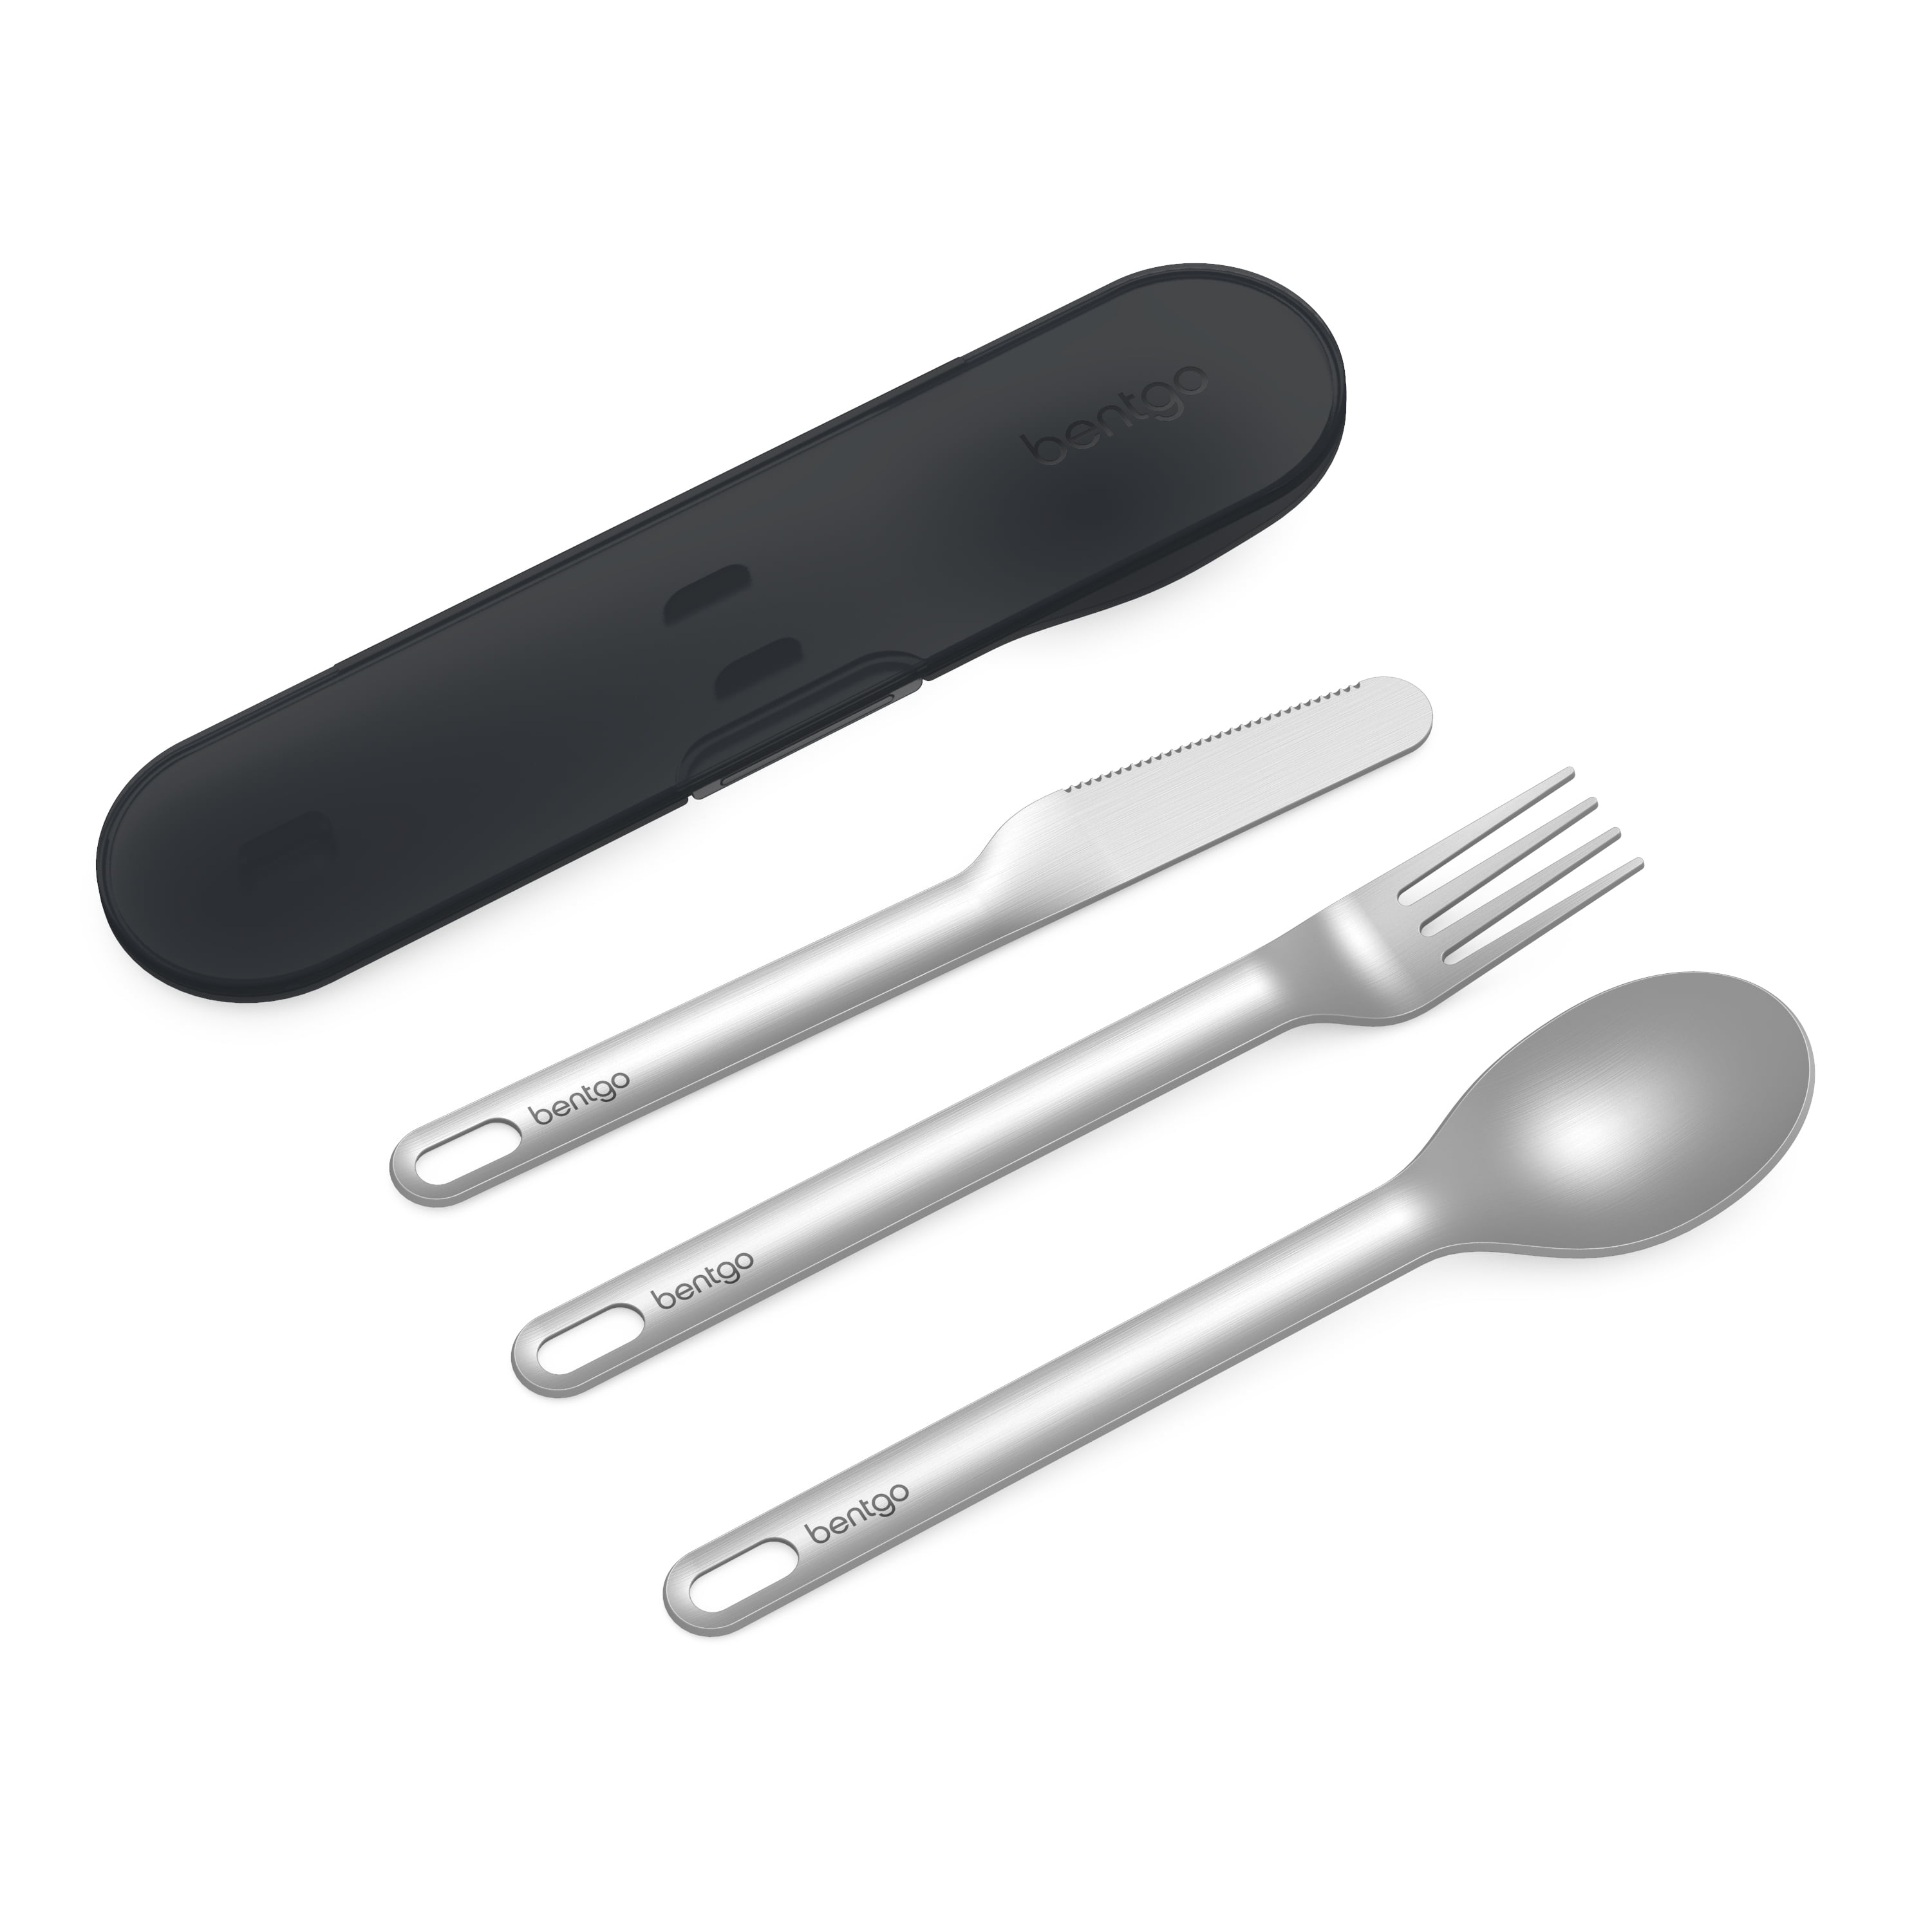 Bentgo® Stainless Travel Utensil Set - Reusable 3-Piece Silverware Set with  Carrying Case, High-Grade Premium Steel, BPA-Free Case, Eco-Friendly 